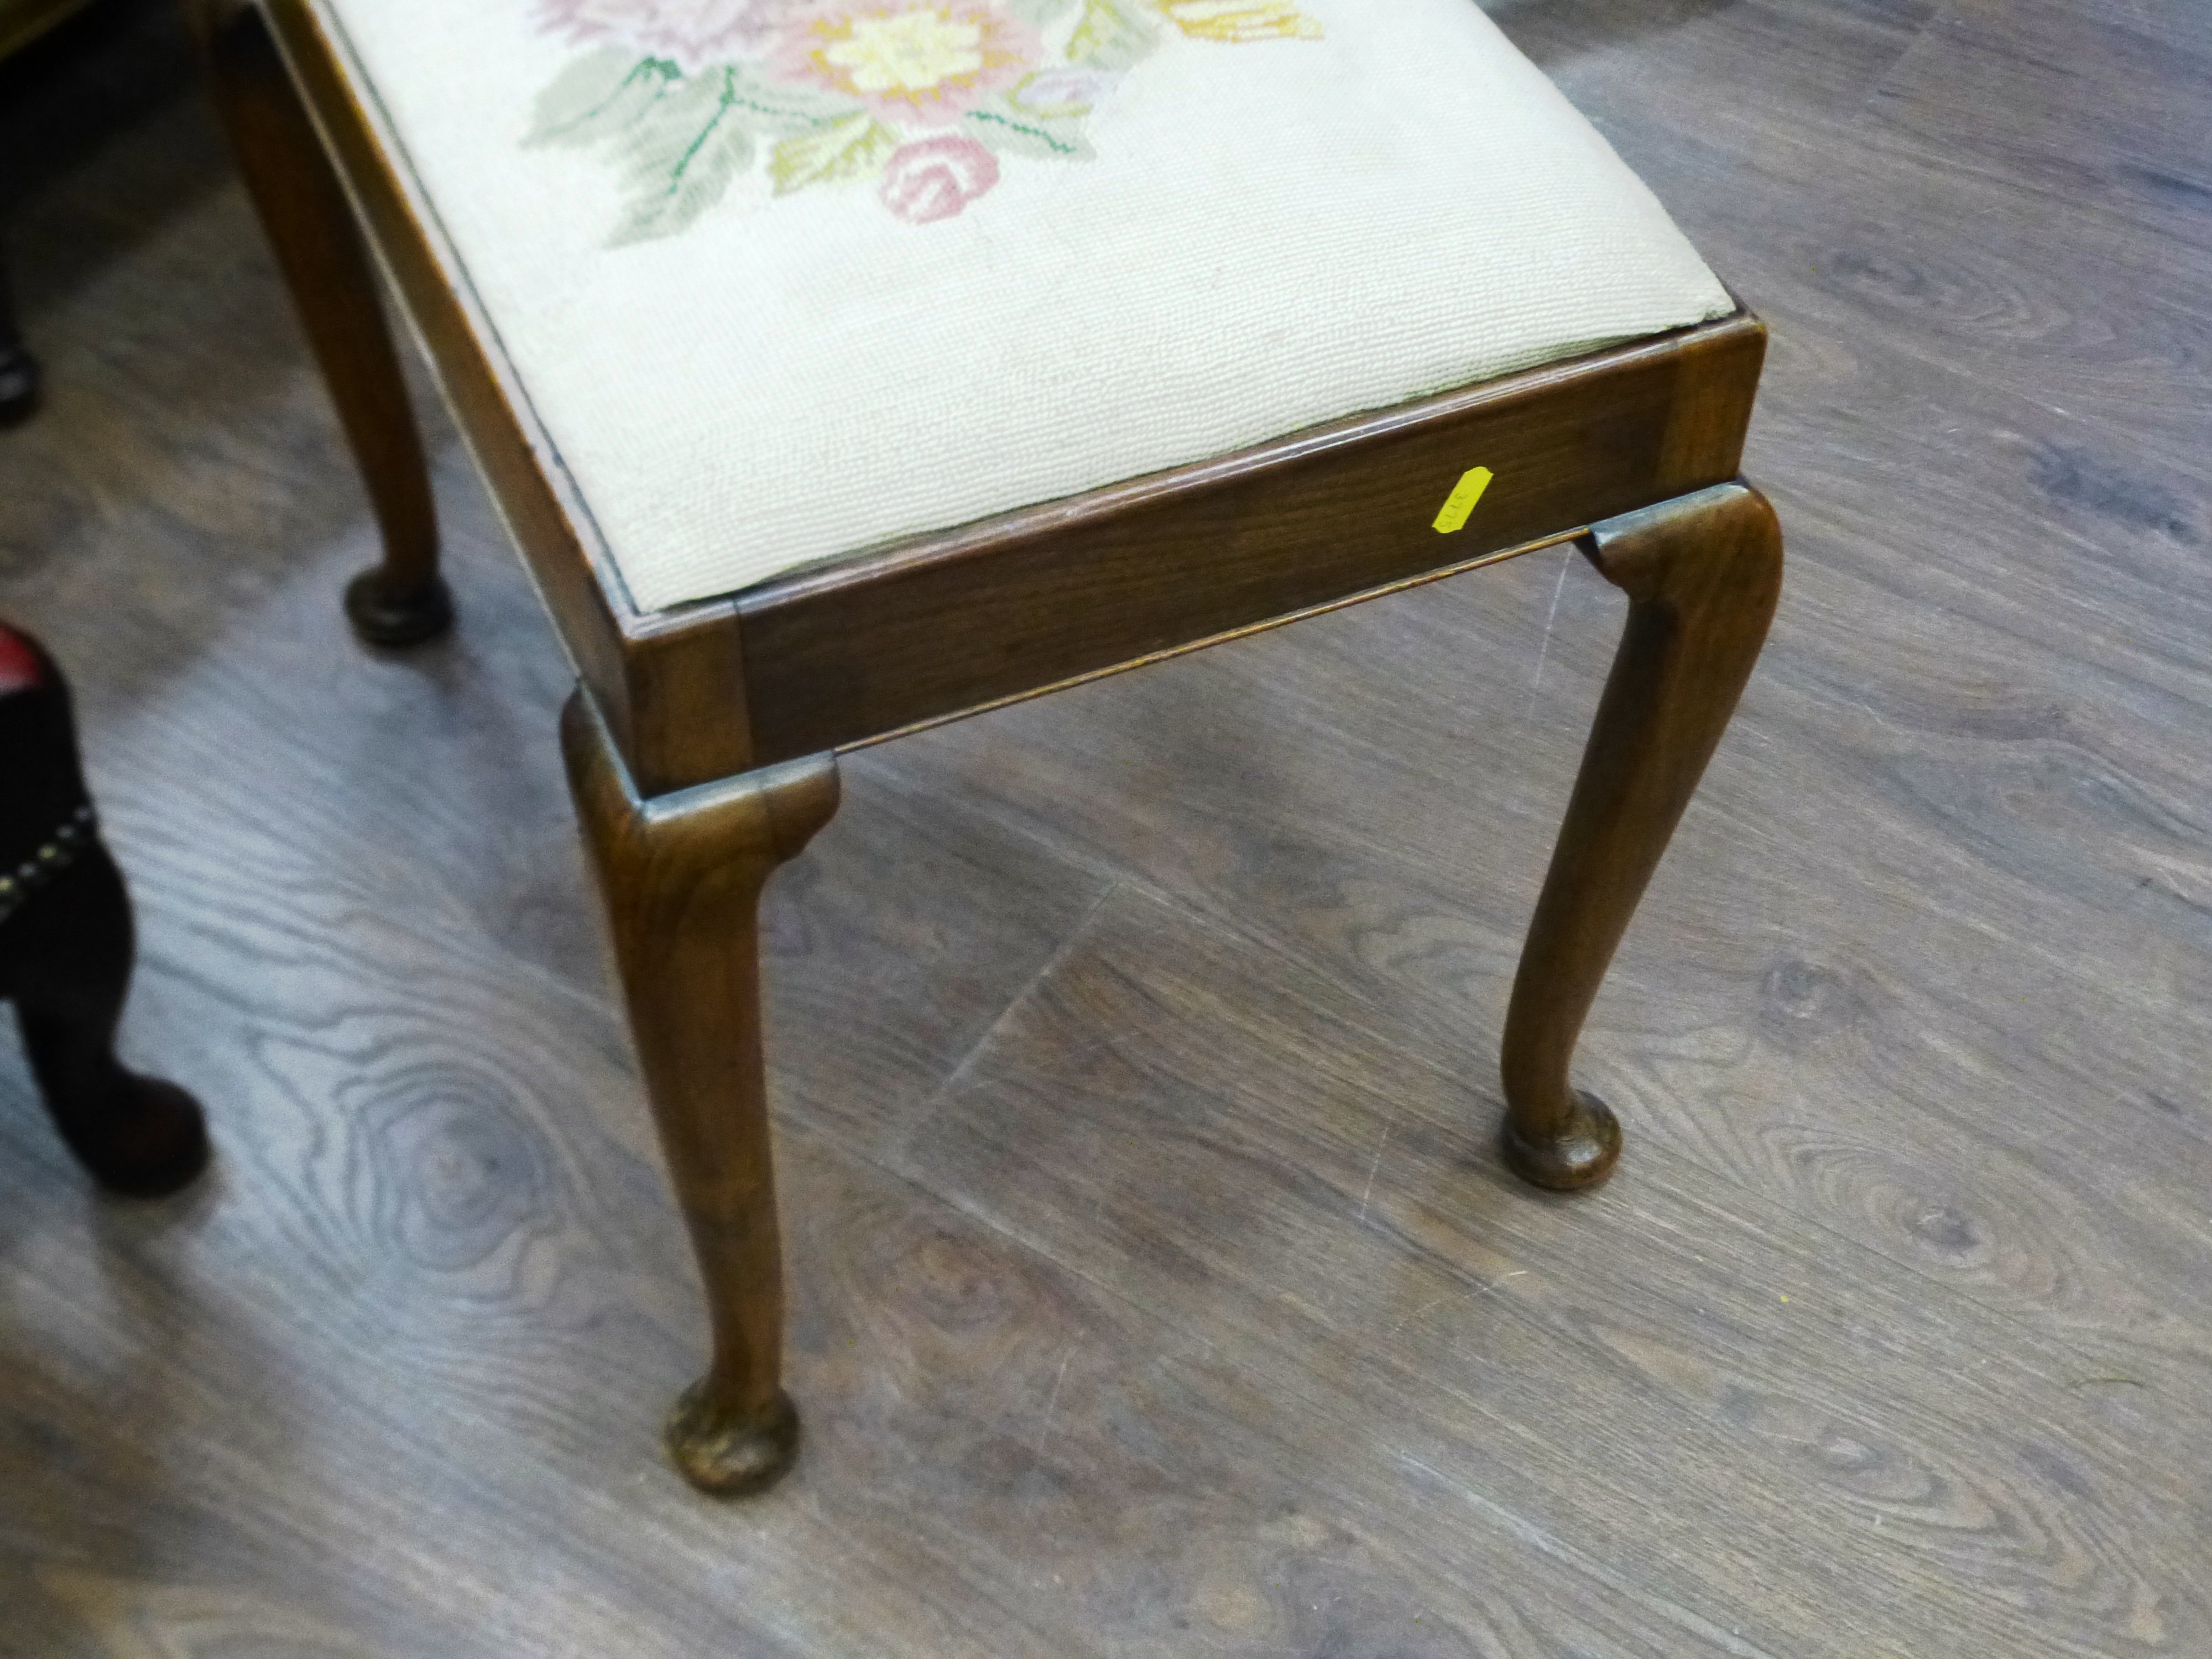 EMBROIDED PIANO STOOL - Image 3 of 3